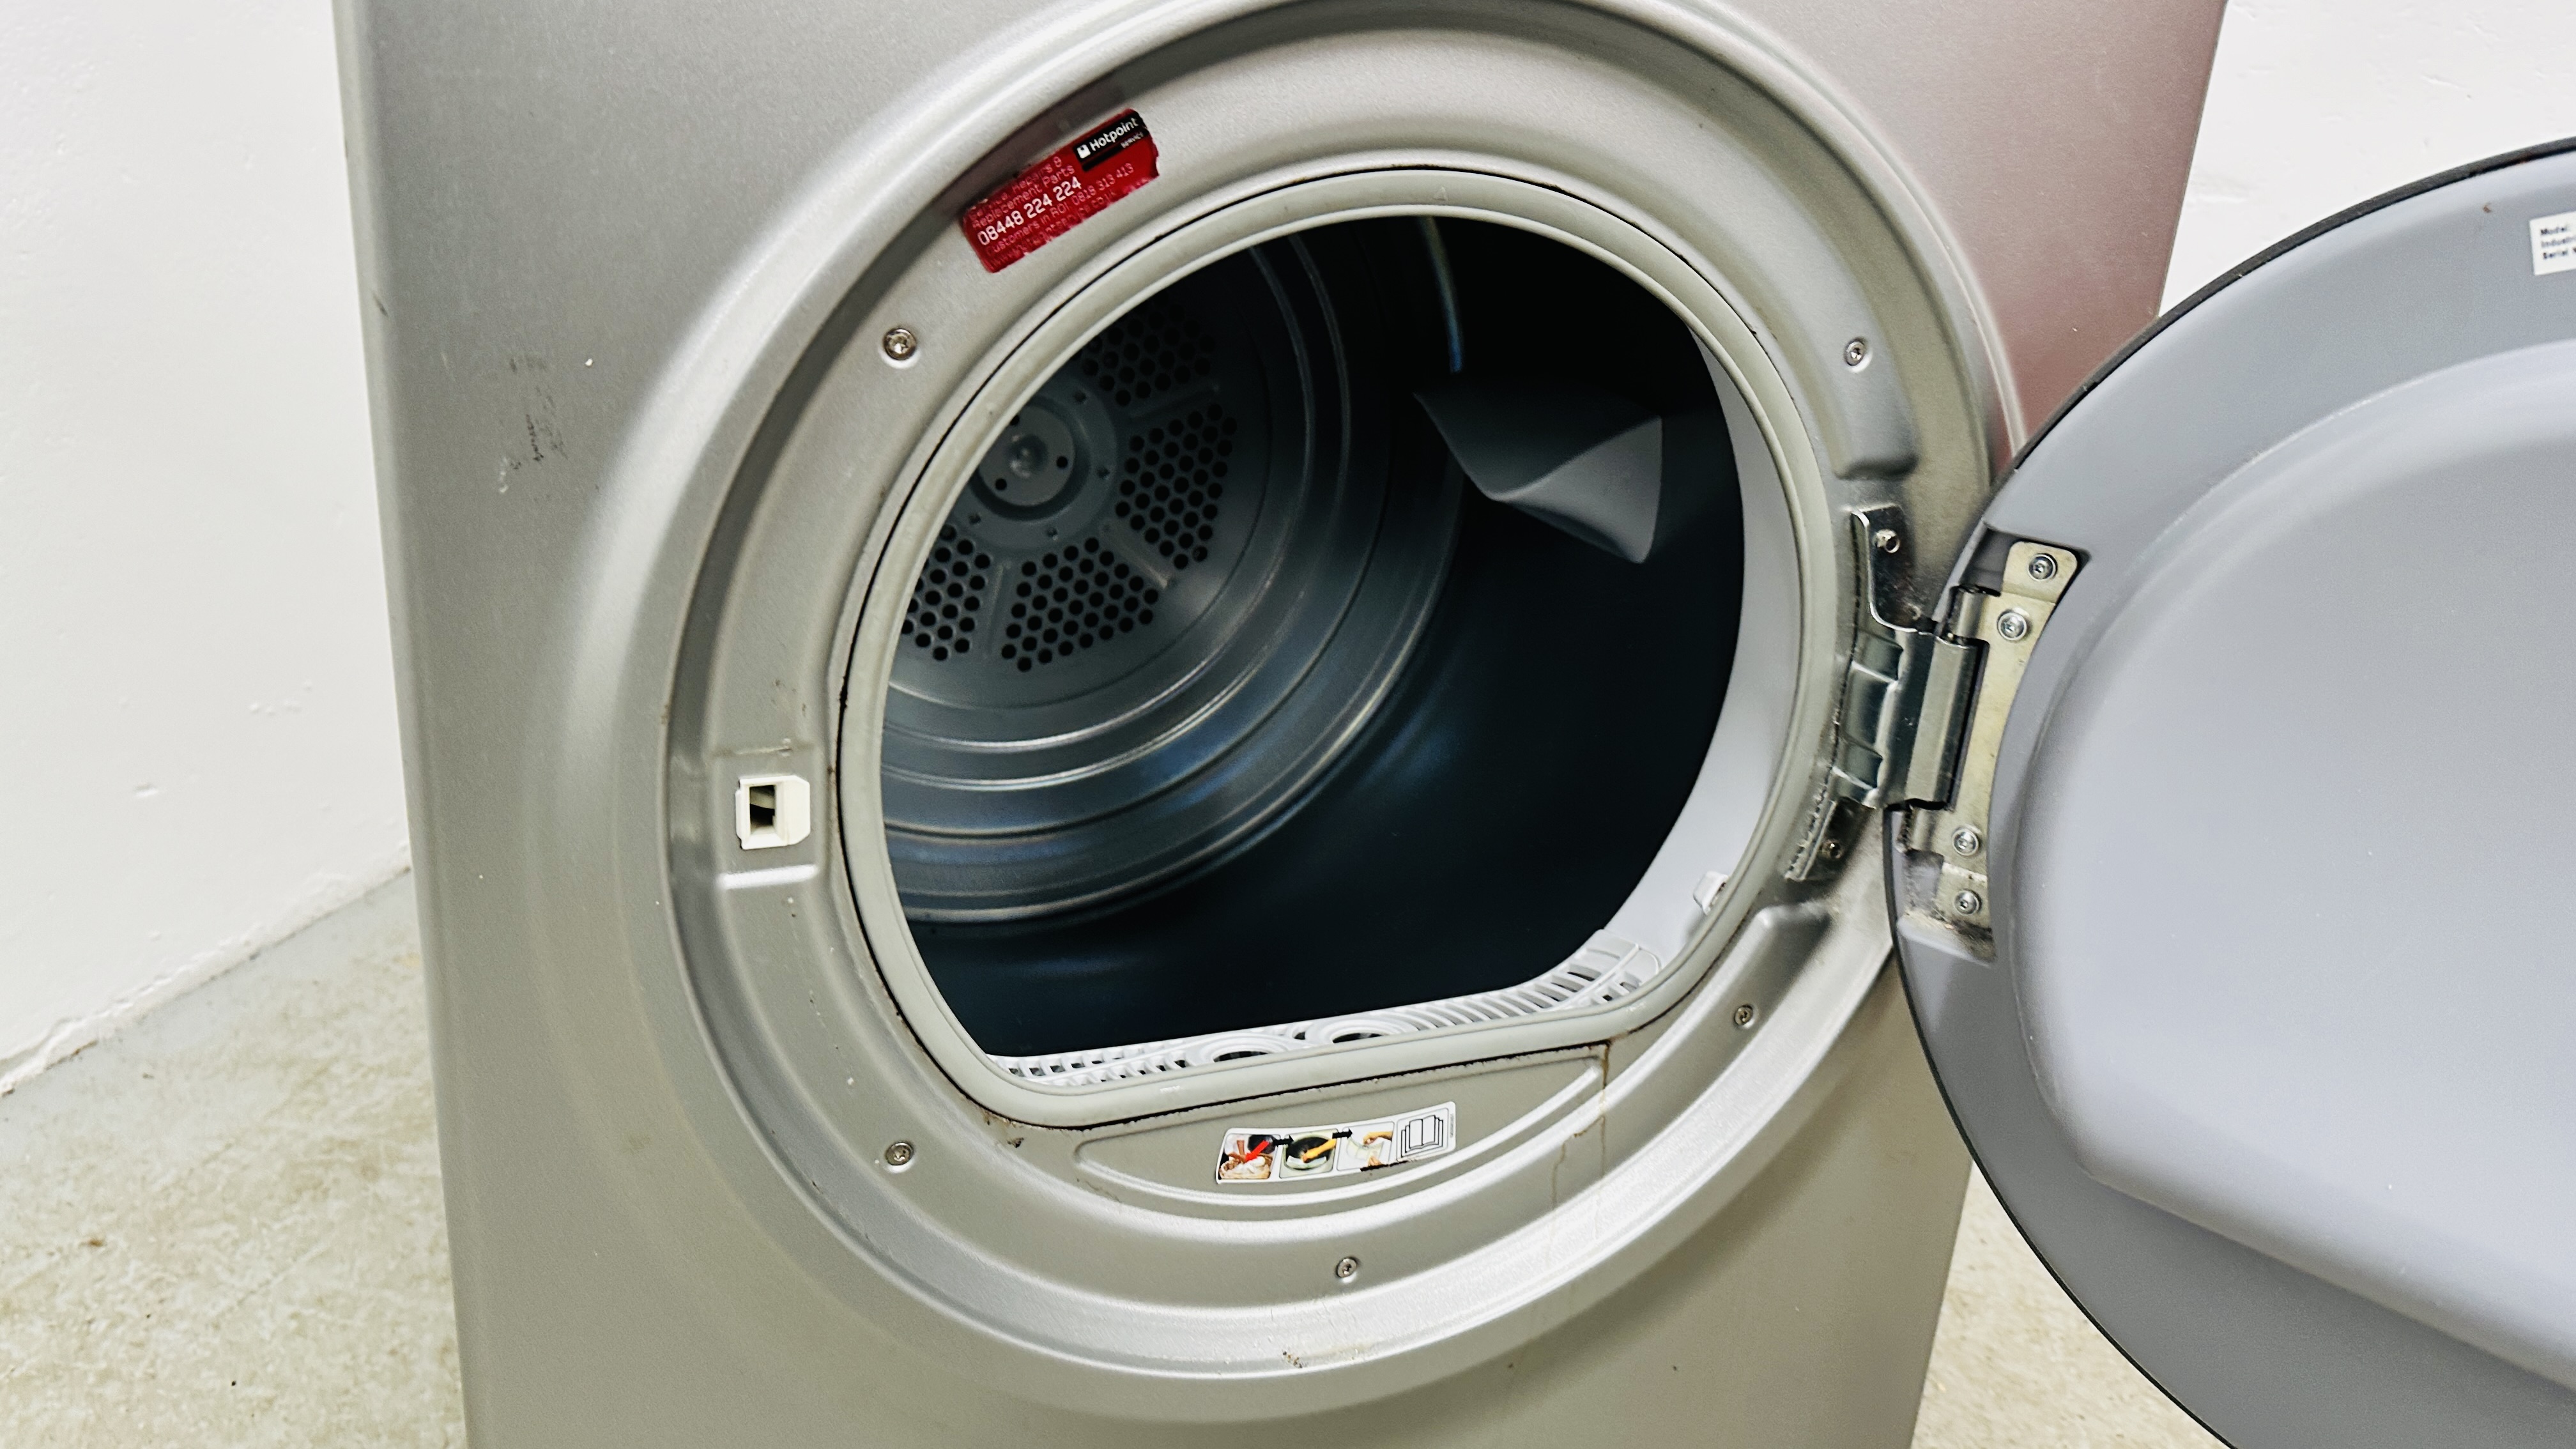 HOTPOINT AQUARIUS 7KG TUMBLE DRYER, SILVER FINISH - SOLD AS SEEN. - Image 6 of 6